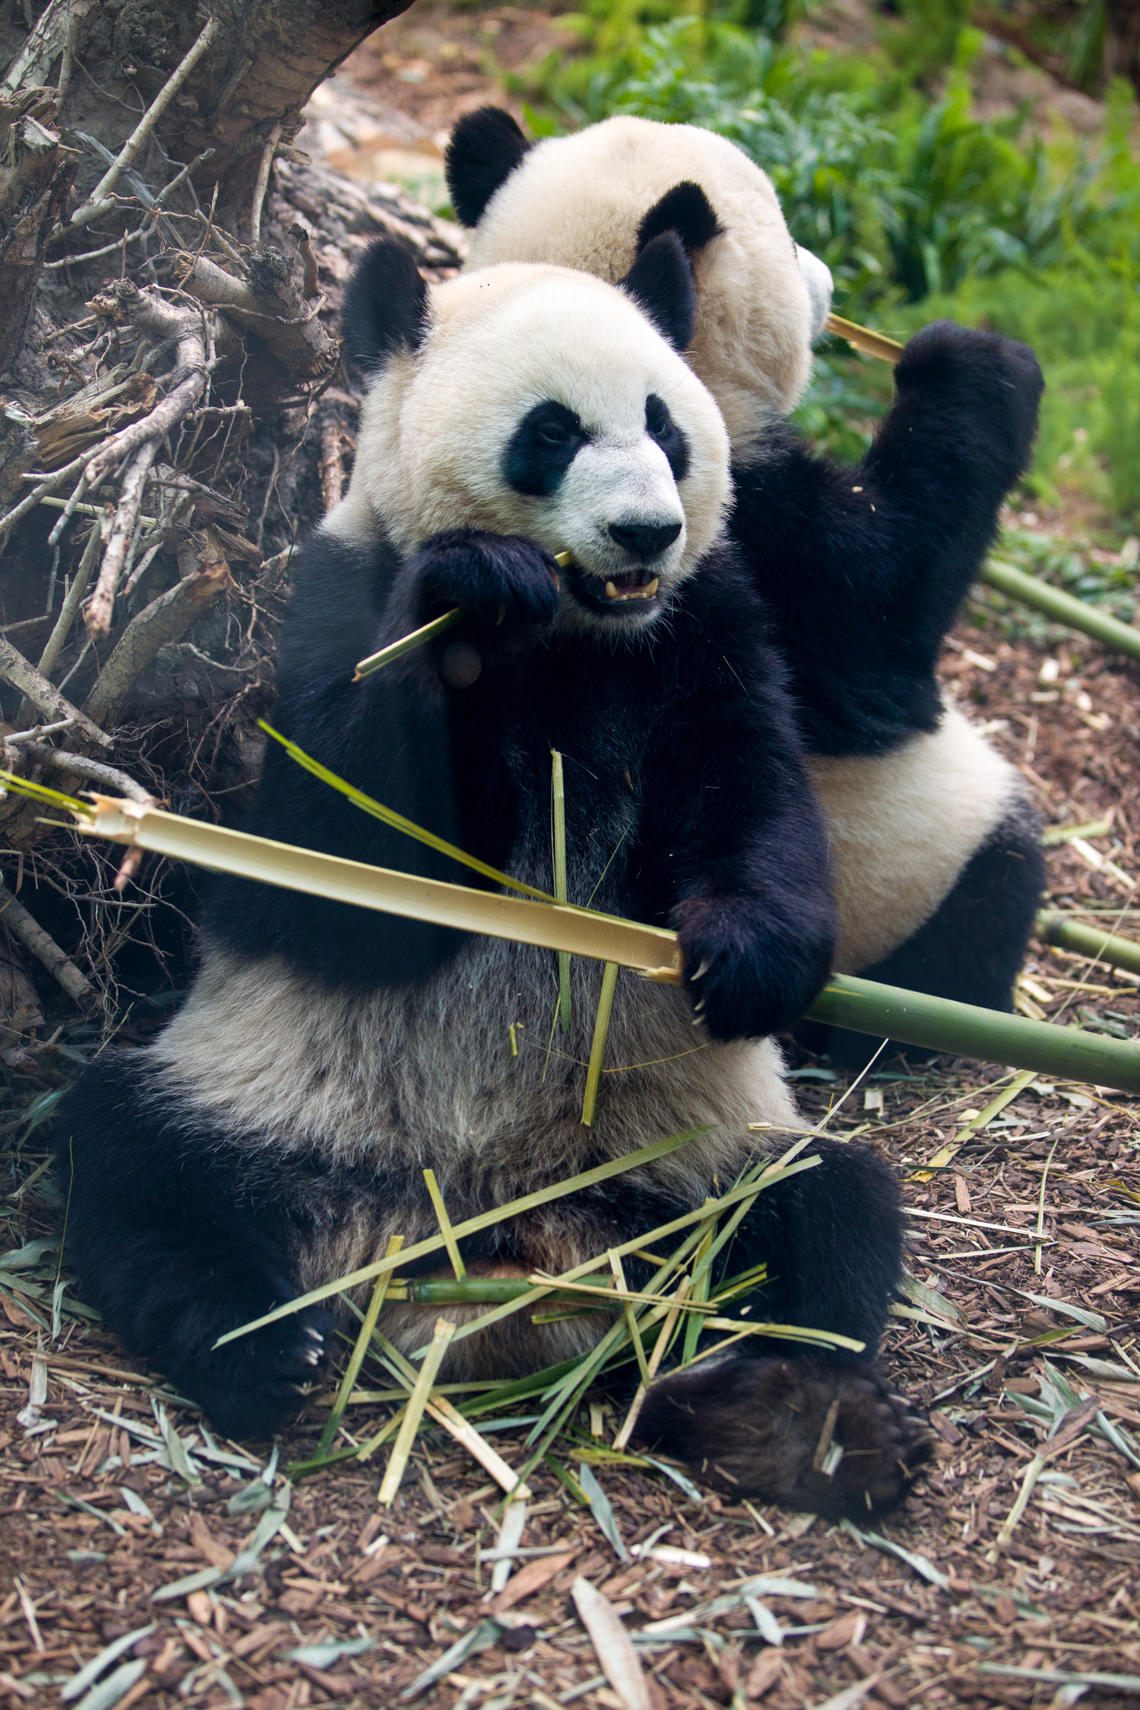 In Chinese culture, the panda is a symbol of friendship and good diplomatic relations. 